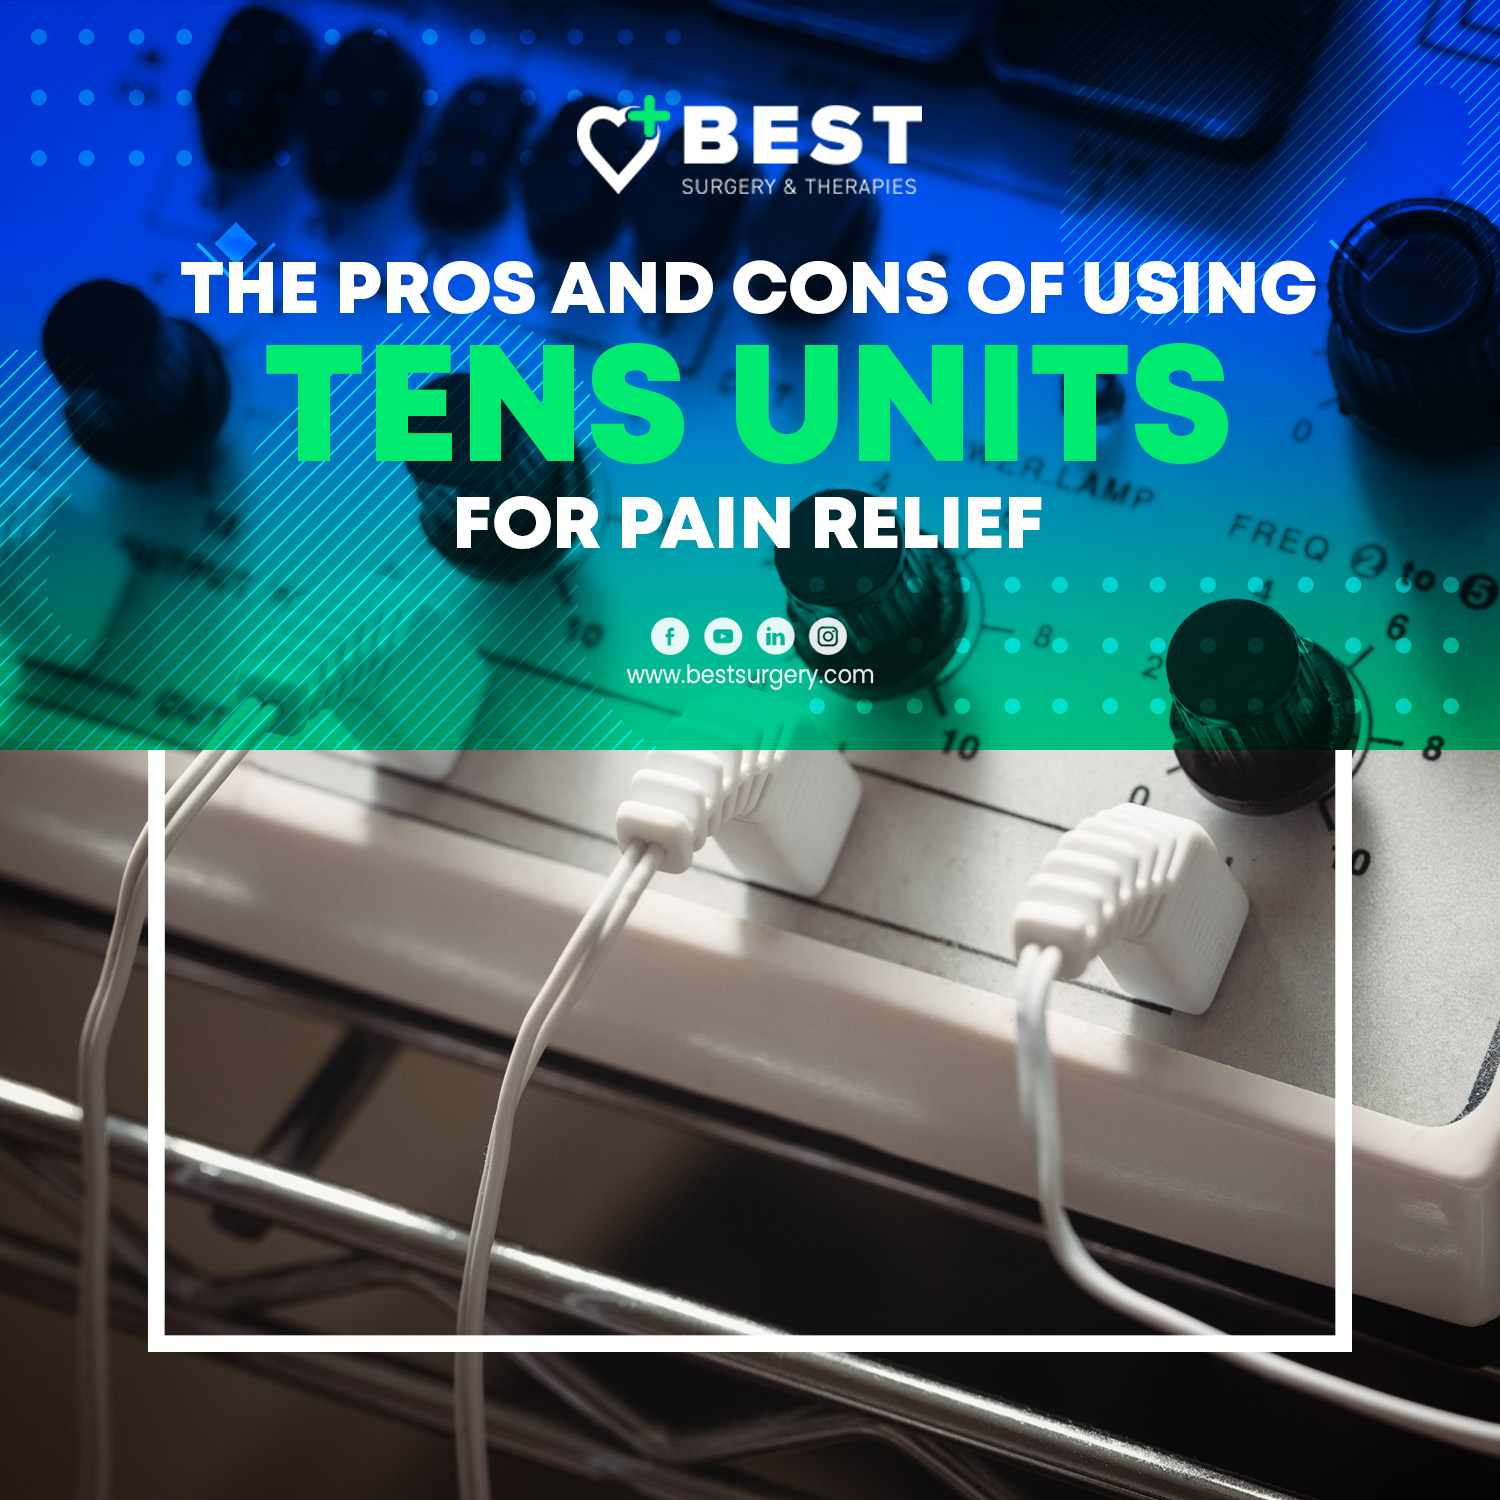 tag-pros-and-cons-of-tens-units-for-pain-relief-best-surgery-and-therapies